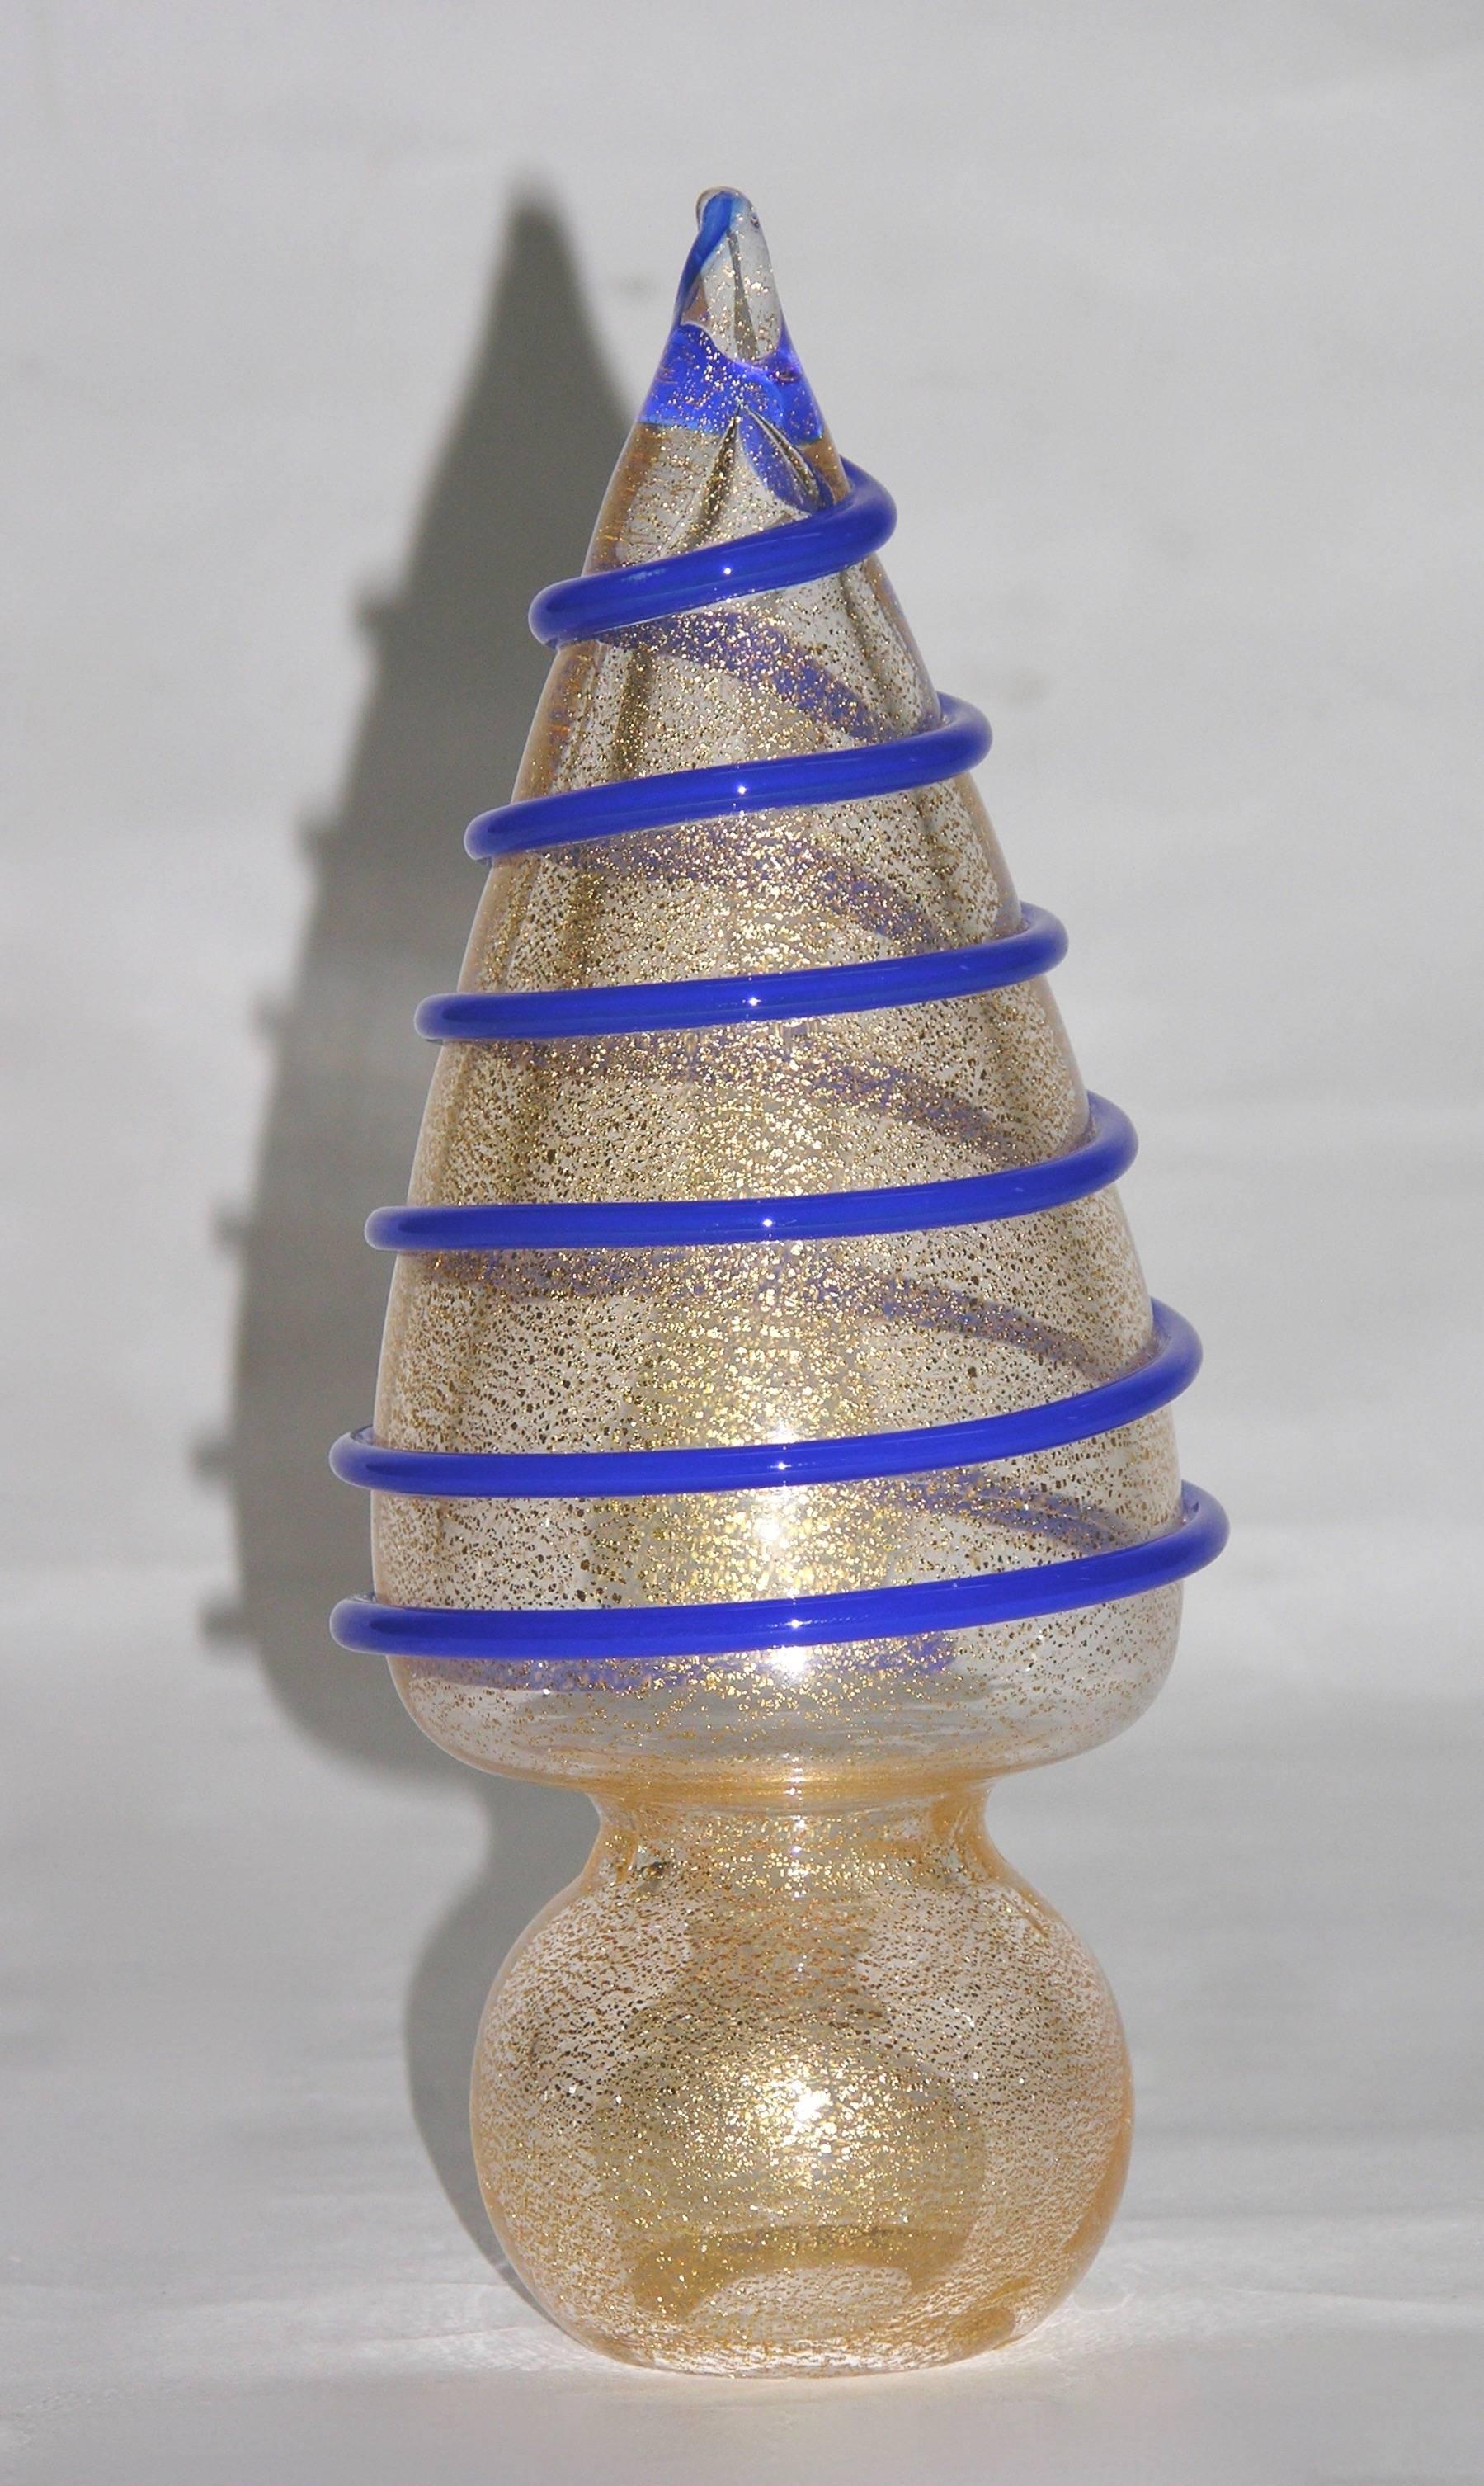 Hand-Crafted 1980s Italian Vintage Colorful Murano Glass Christmas Trees Sculptures by Formia